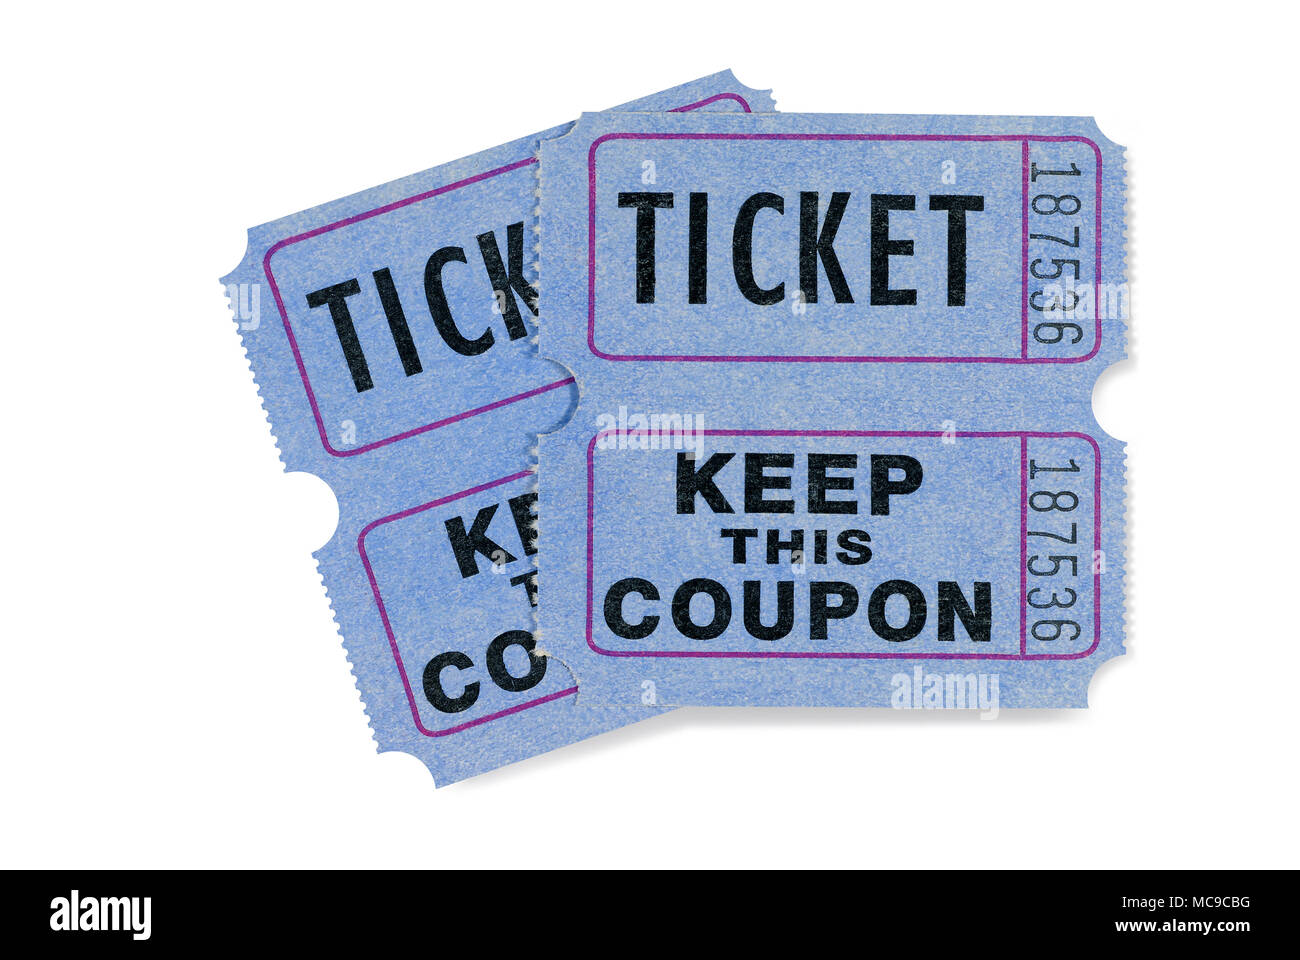 Blue raffle tickets with coupon attached Stock Photo